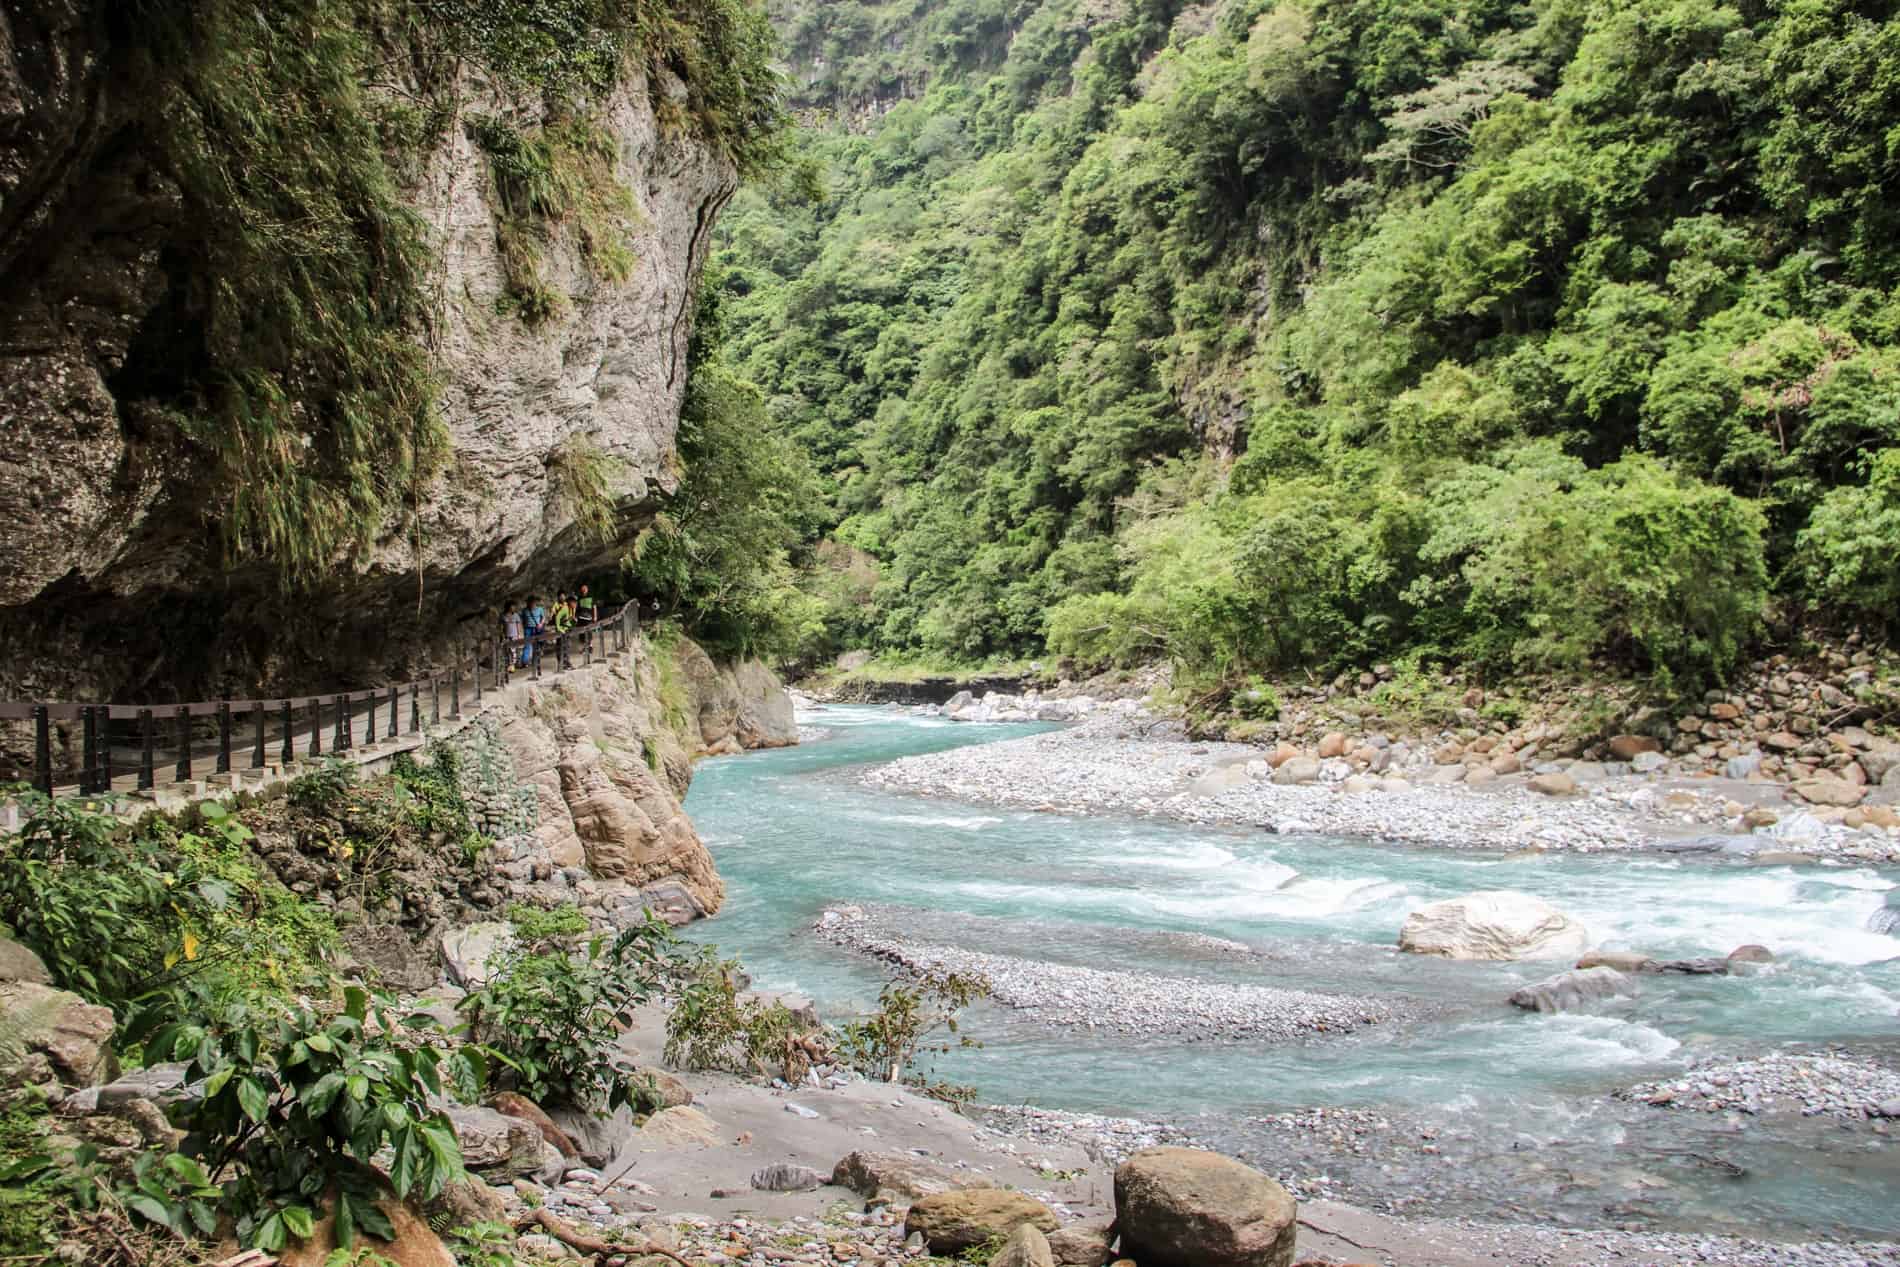 A walking trail cut into a cliff face next to the crystal blue waters of Taroko Gorge.